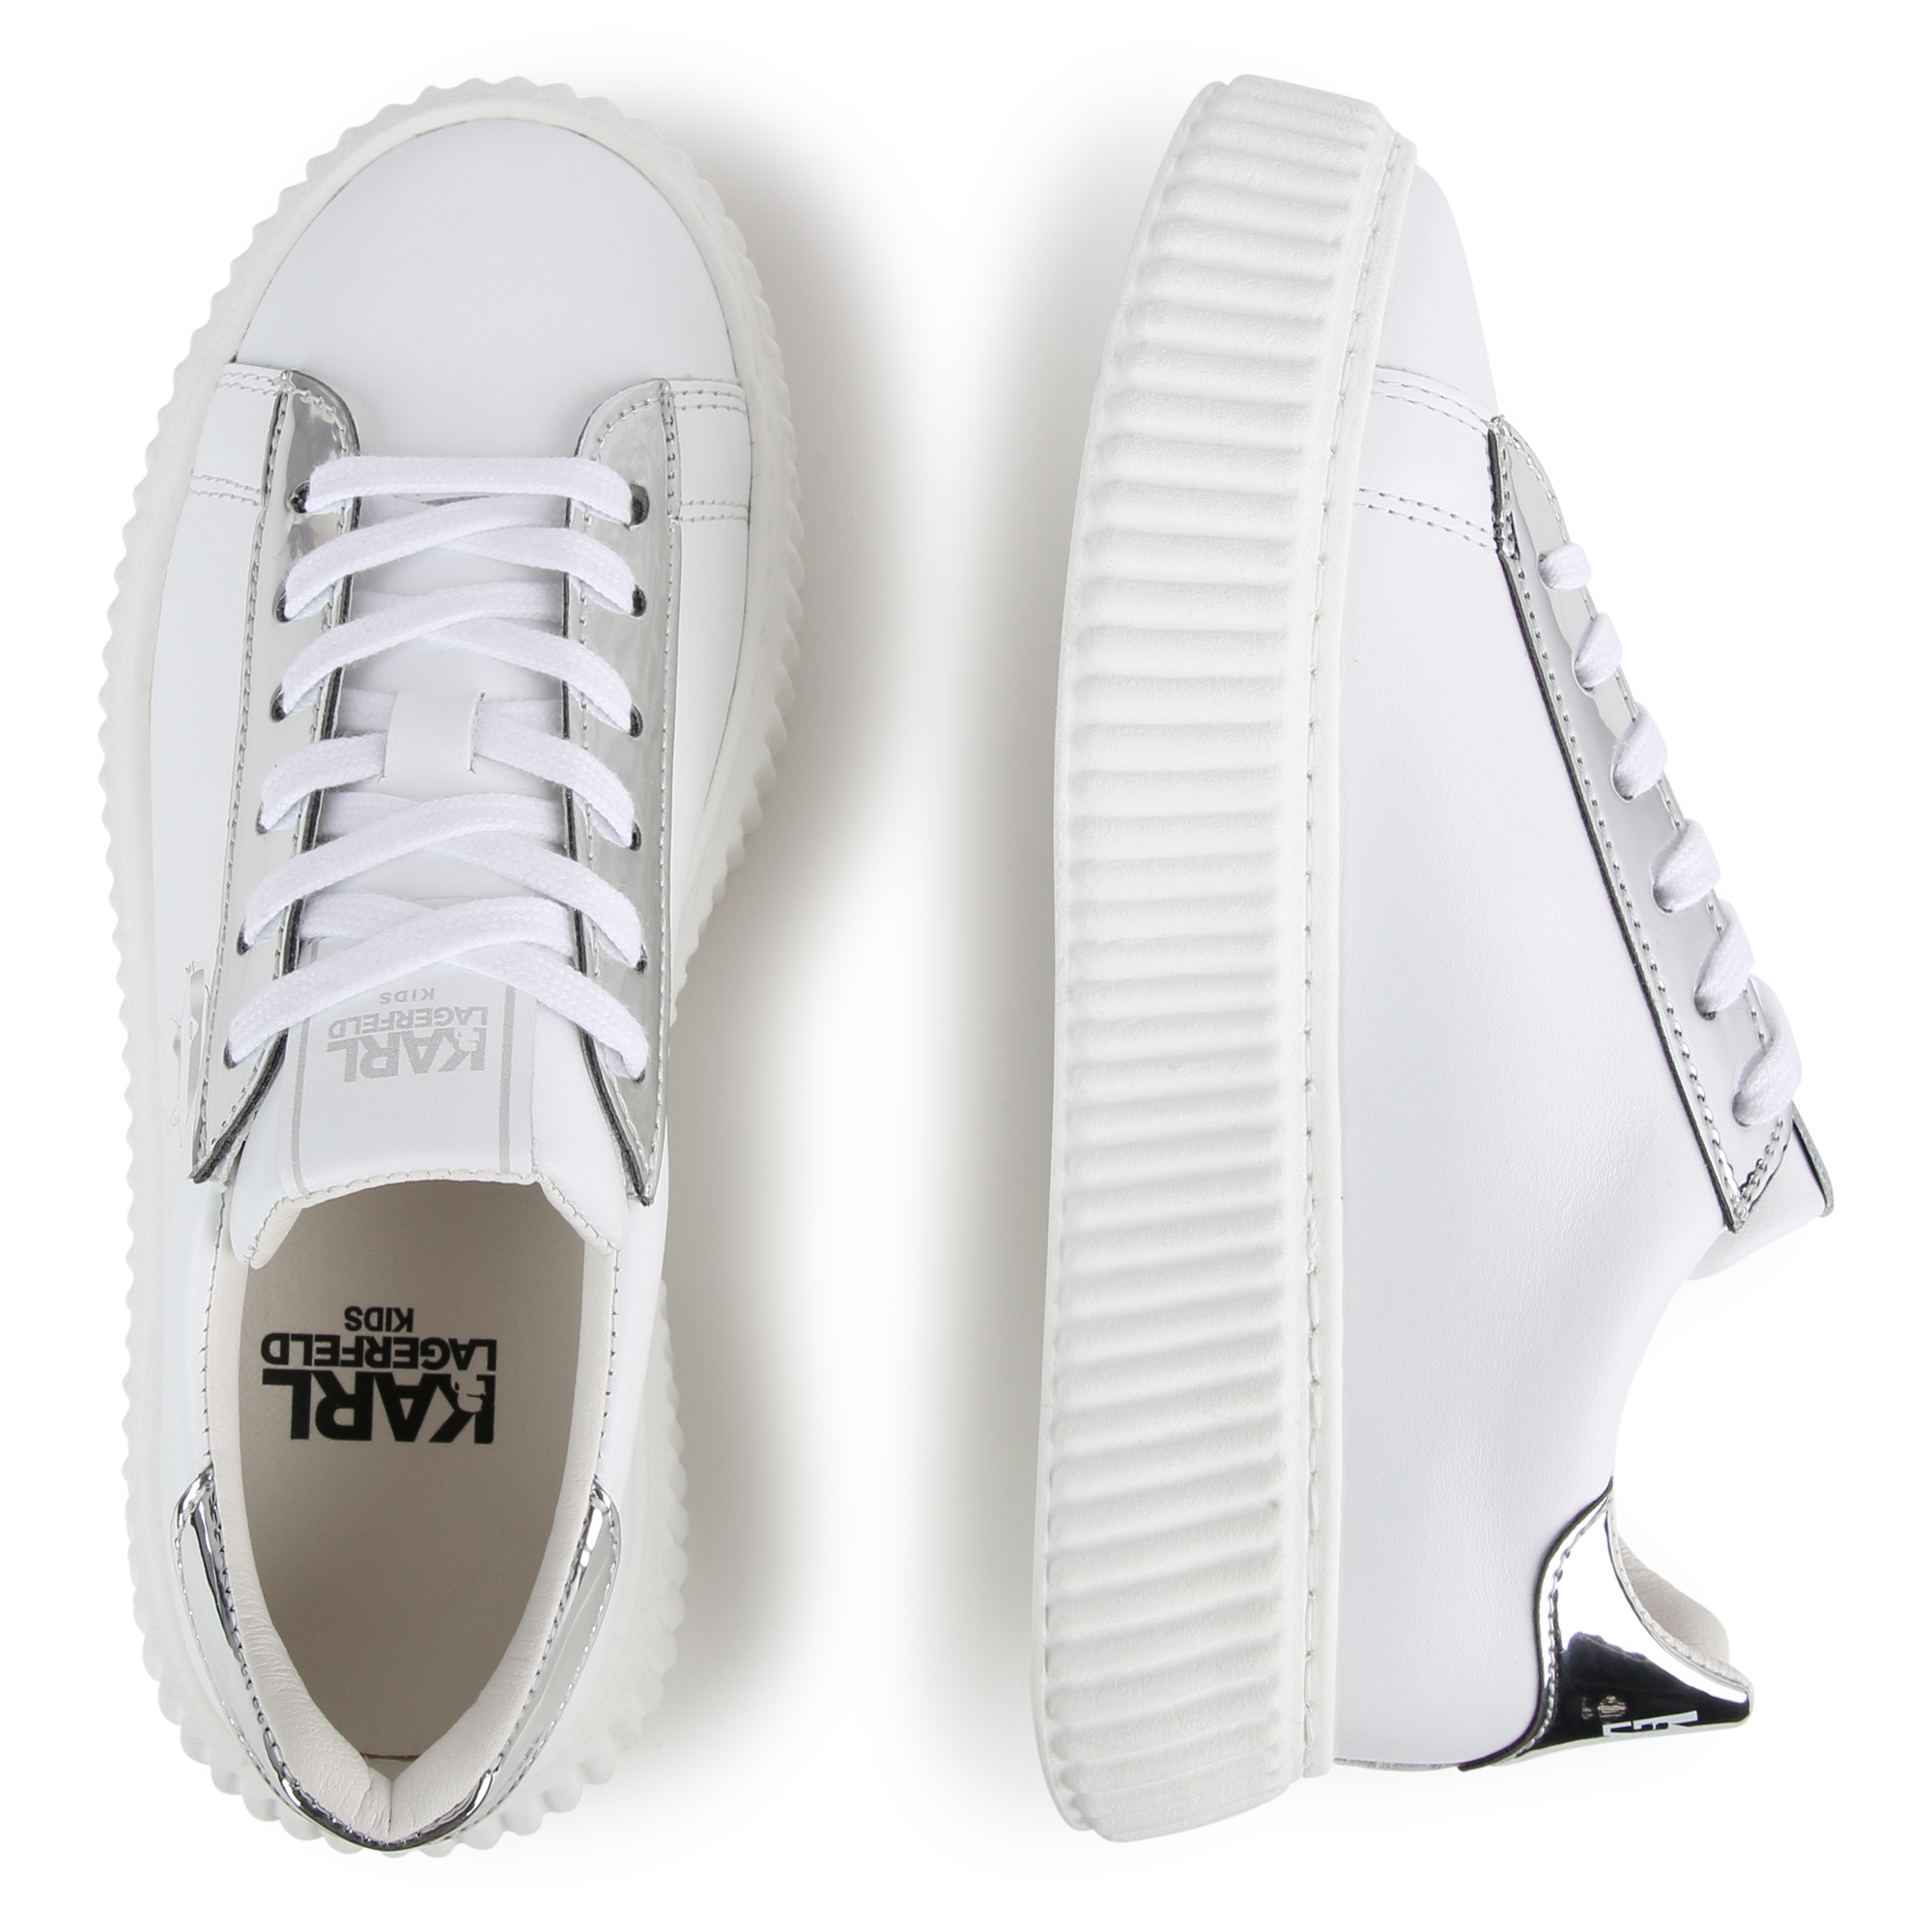 Low-top leather trainers KARL LAGERFELD KIDS for GIRL